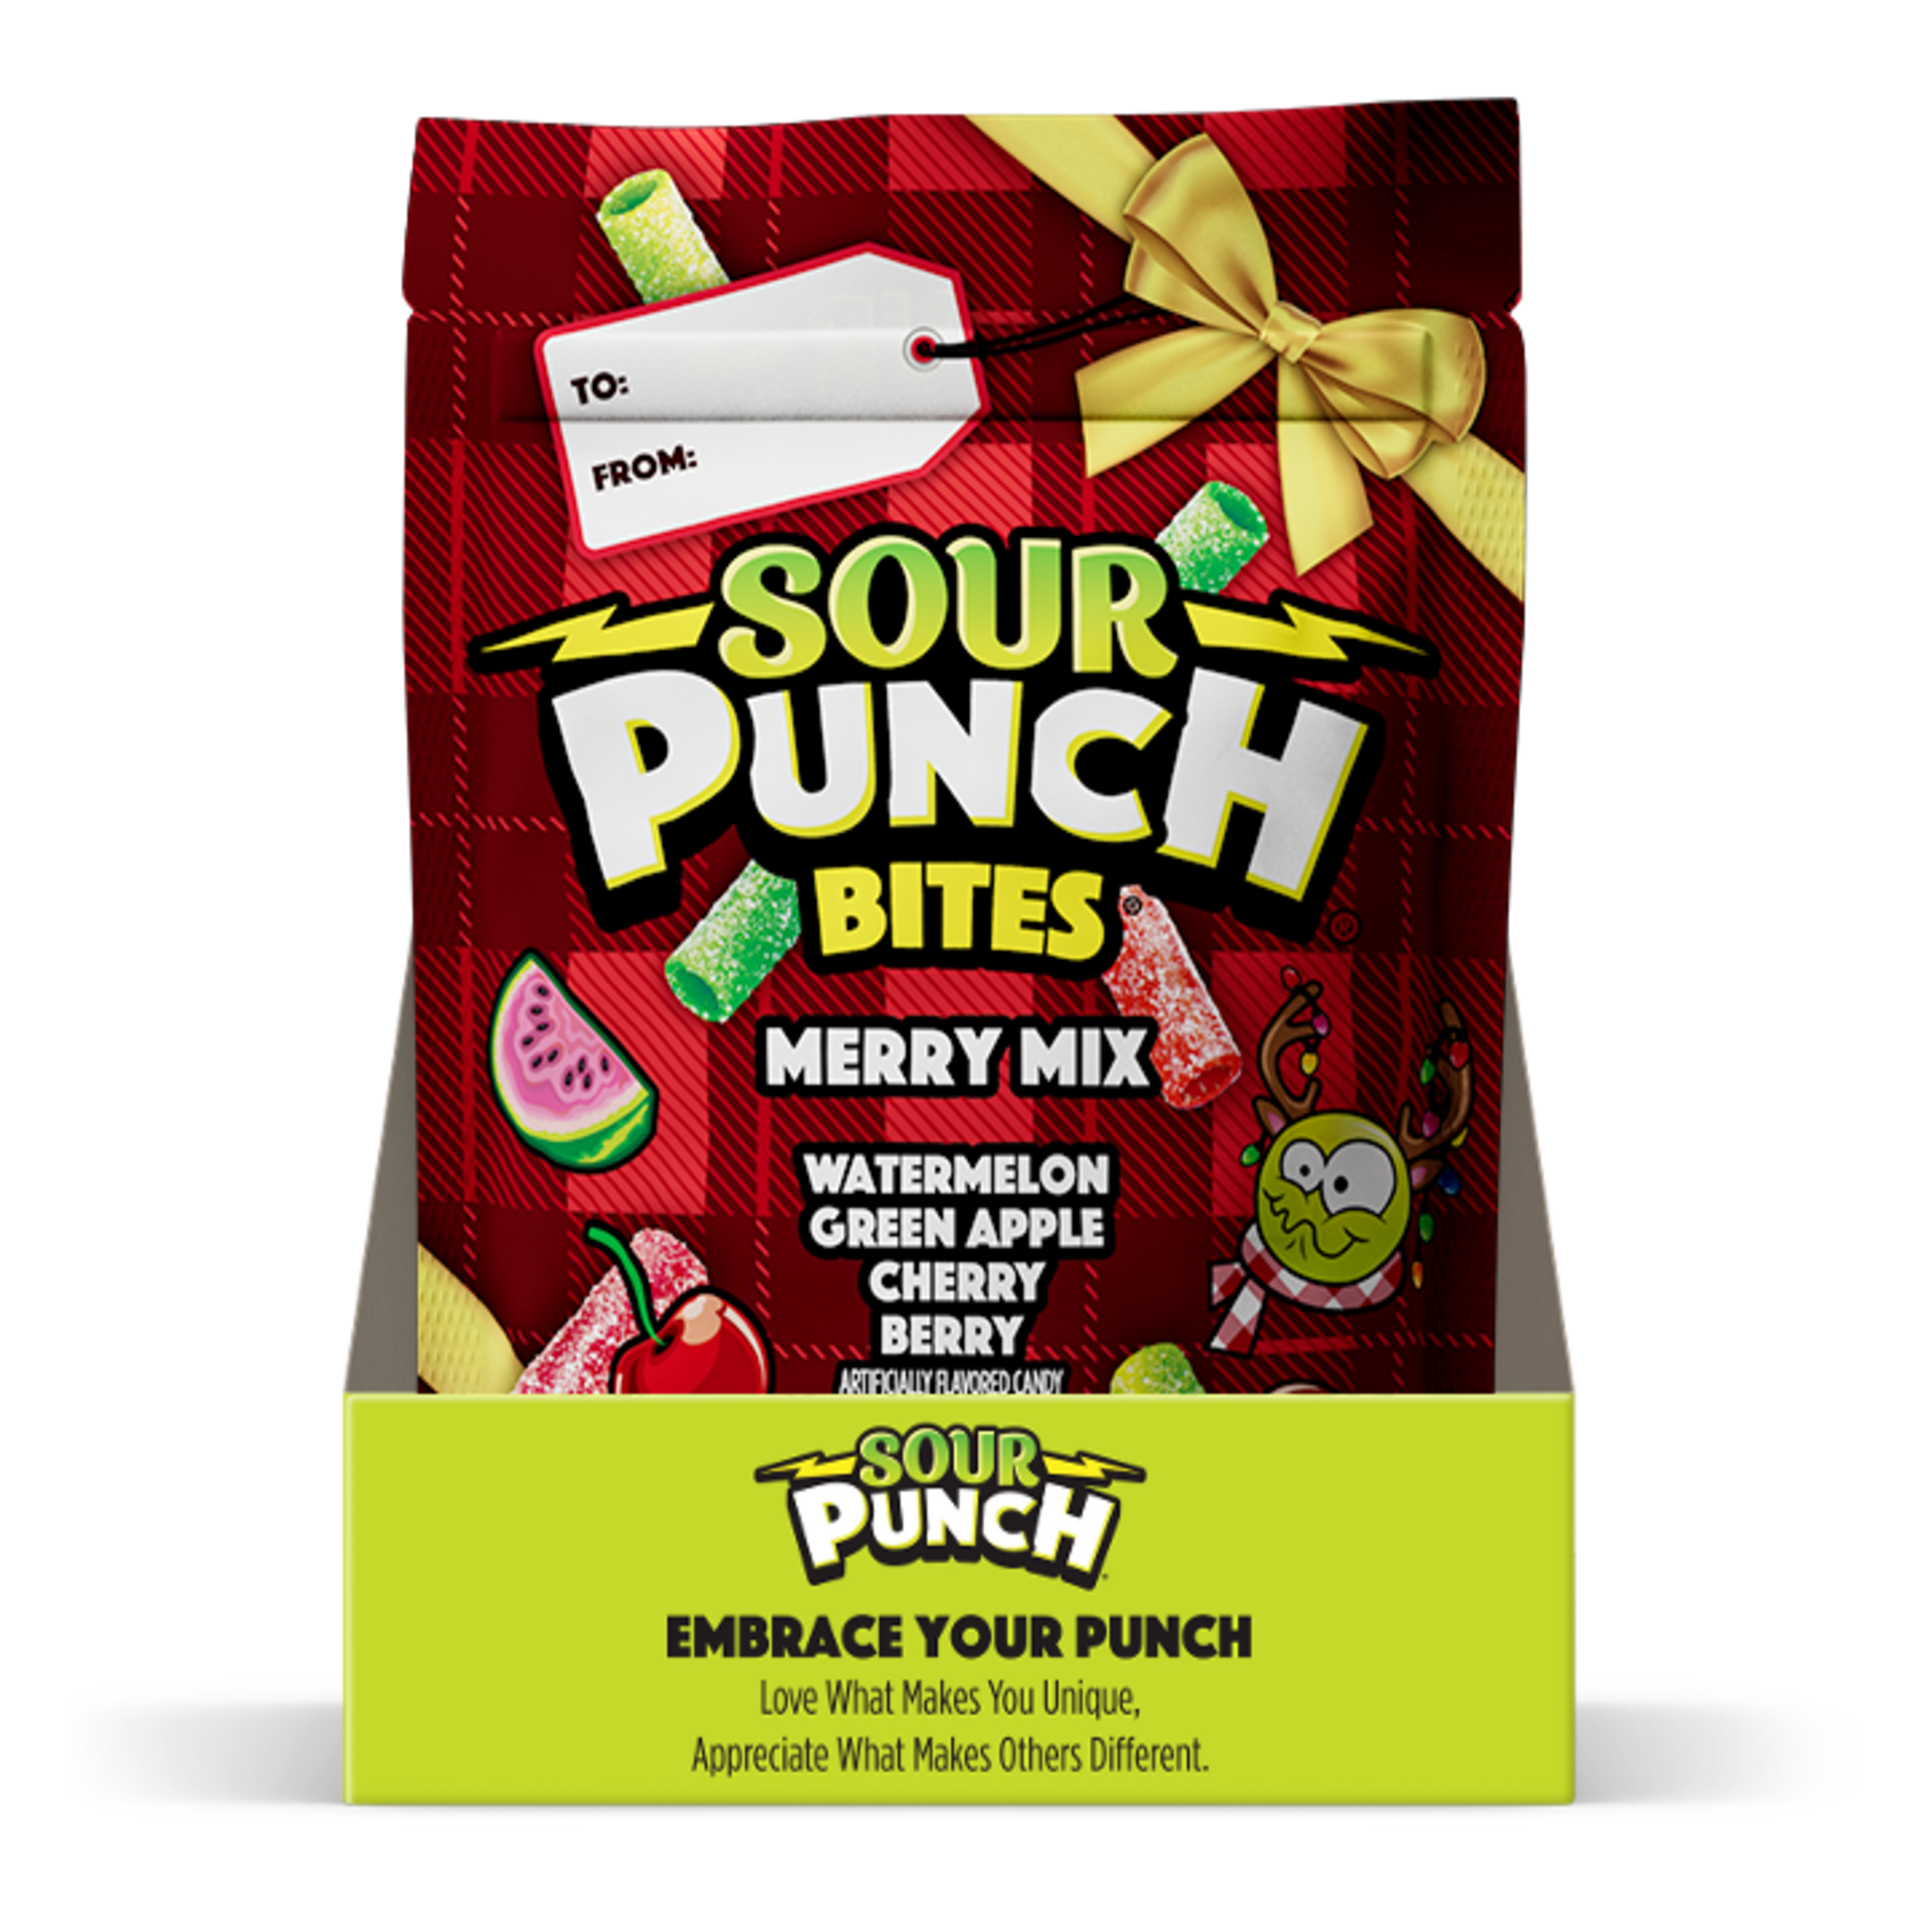 SOUR PUNCH Merry Mix Bites holiday candy - 6 pack of festive candy bags